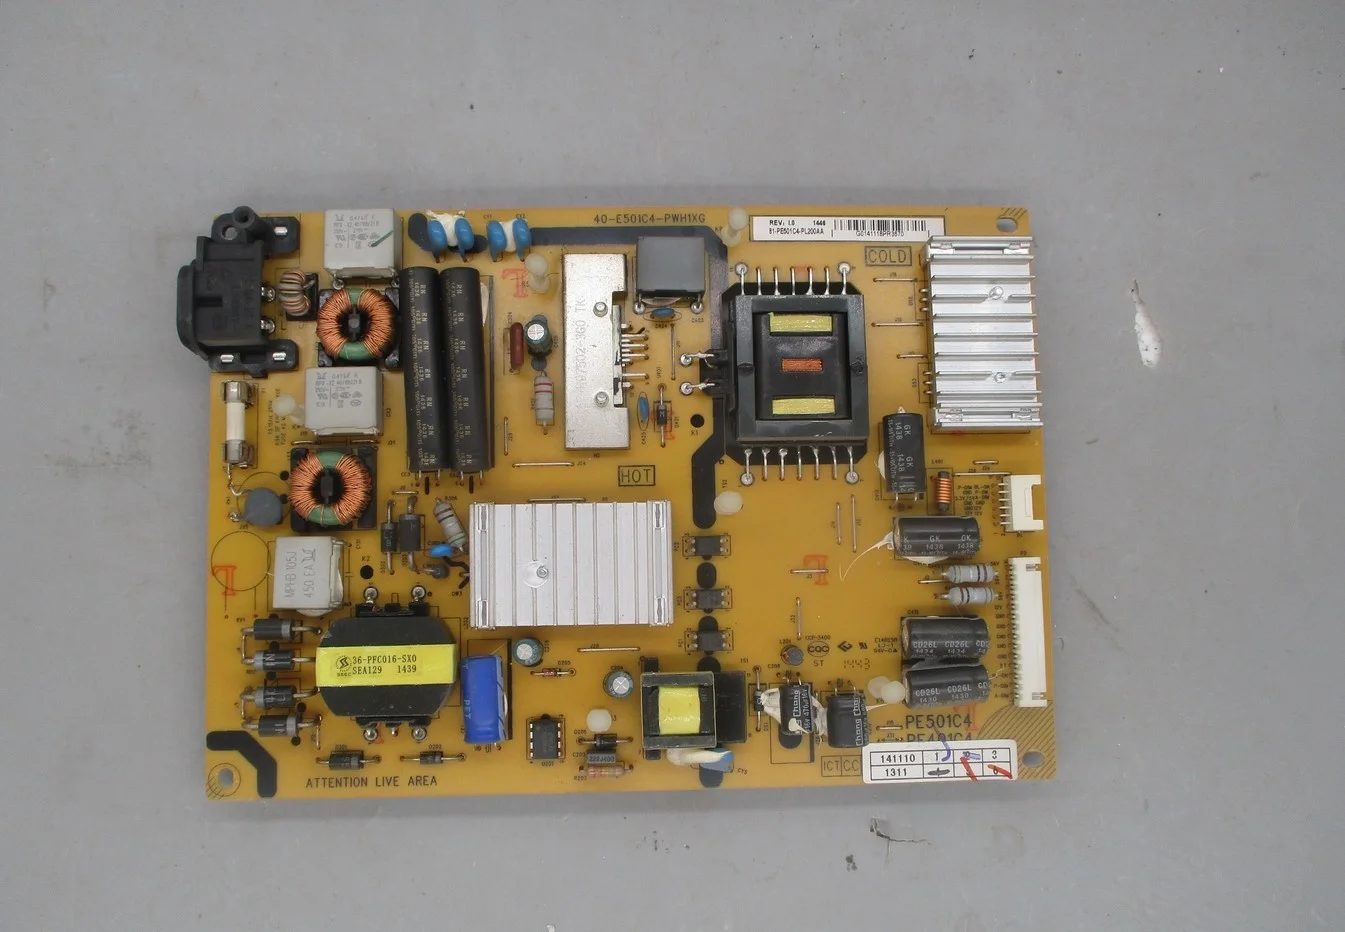 

Disassemble Lcd for Tcl D55a710 Power Board 40-e501c4-pwh1xg 81-pe501c4-pl200aa